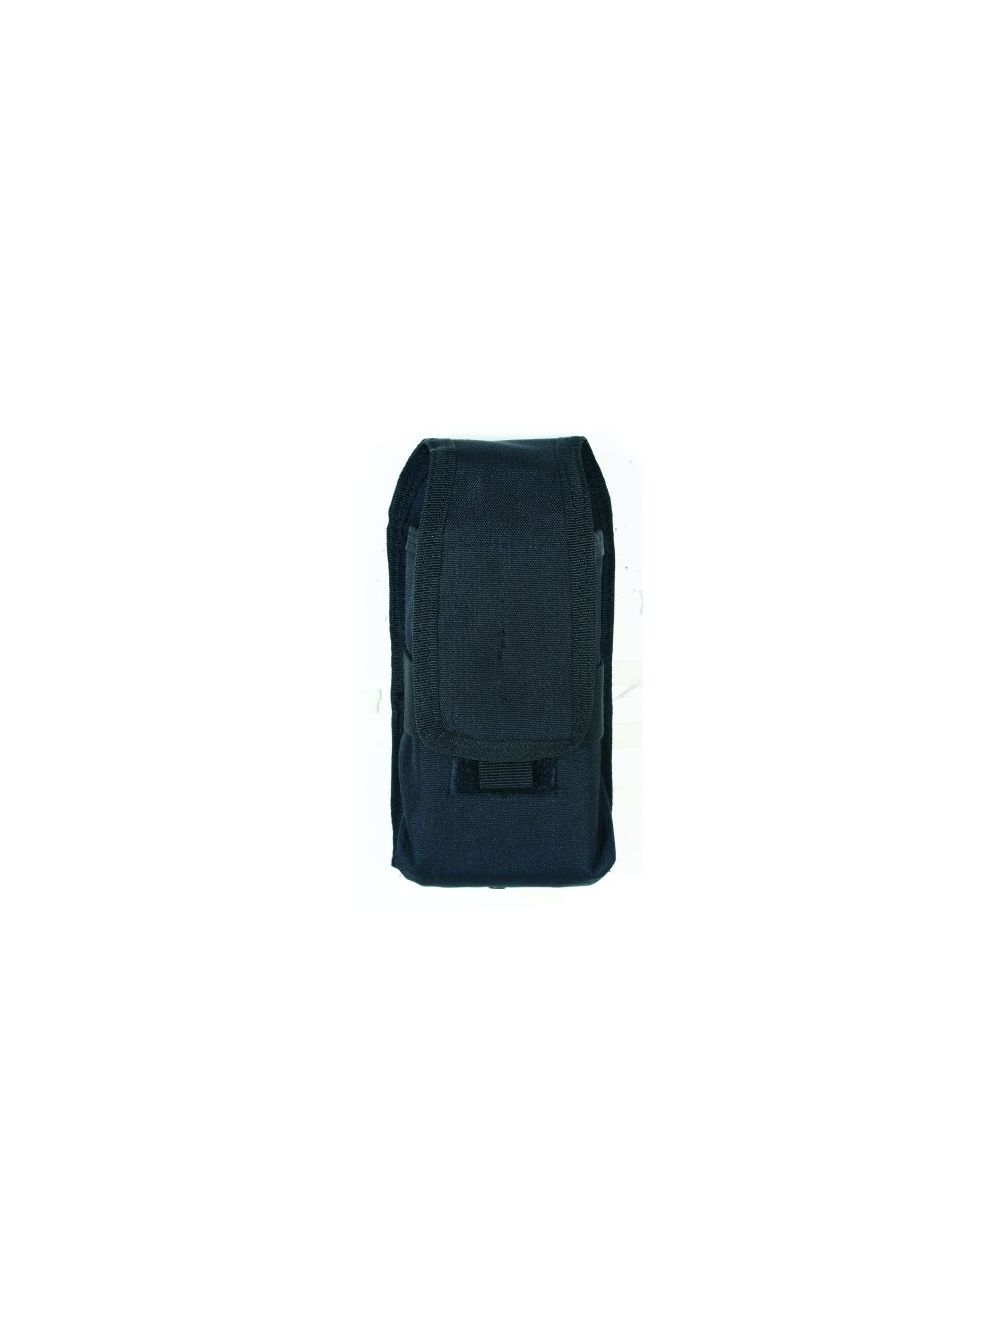 Molle Compatible Radio Pouch